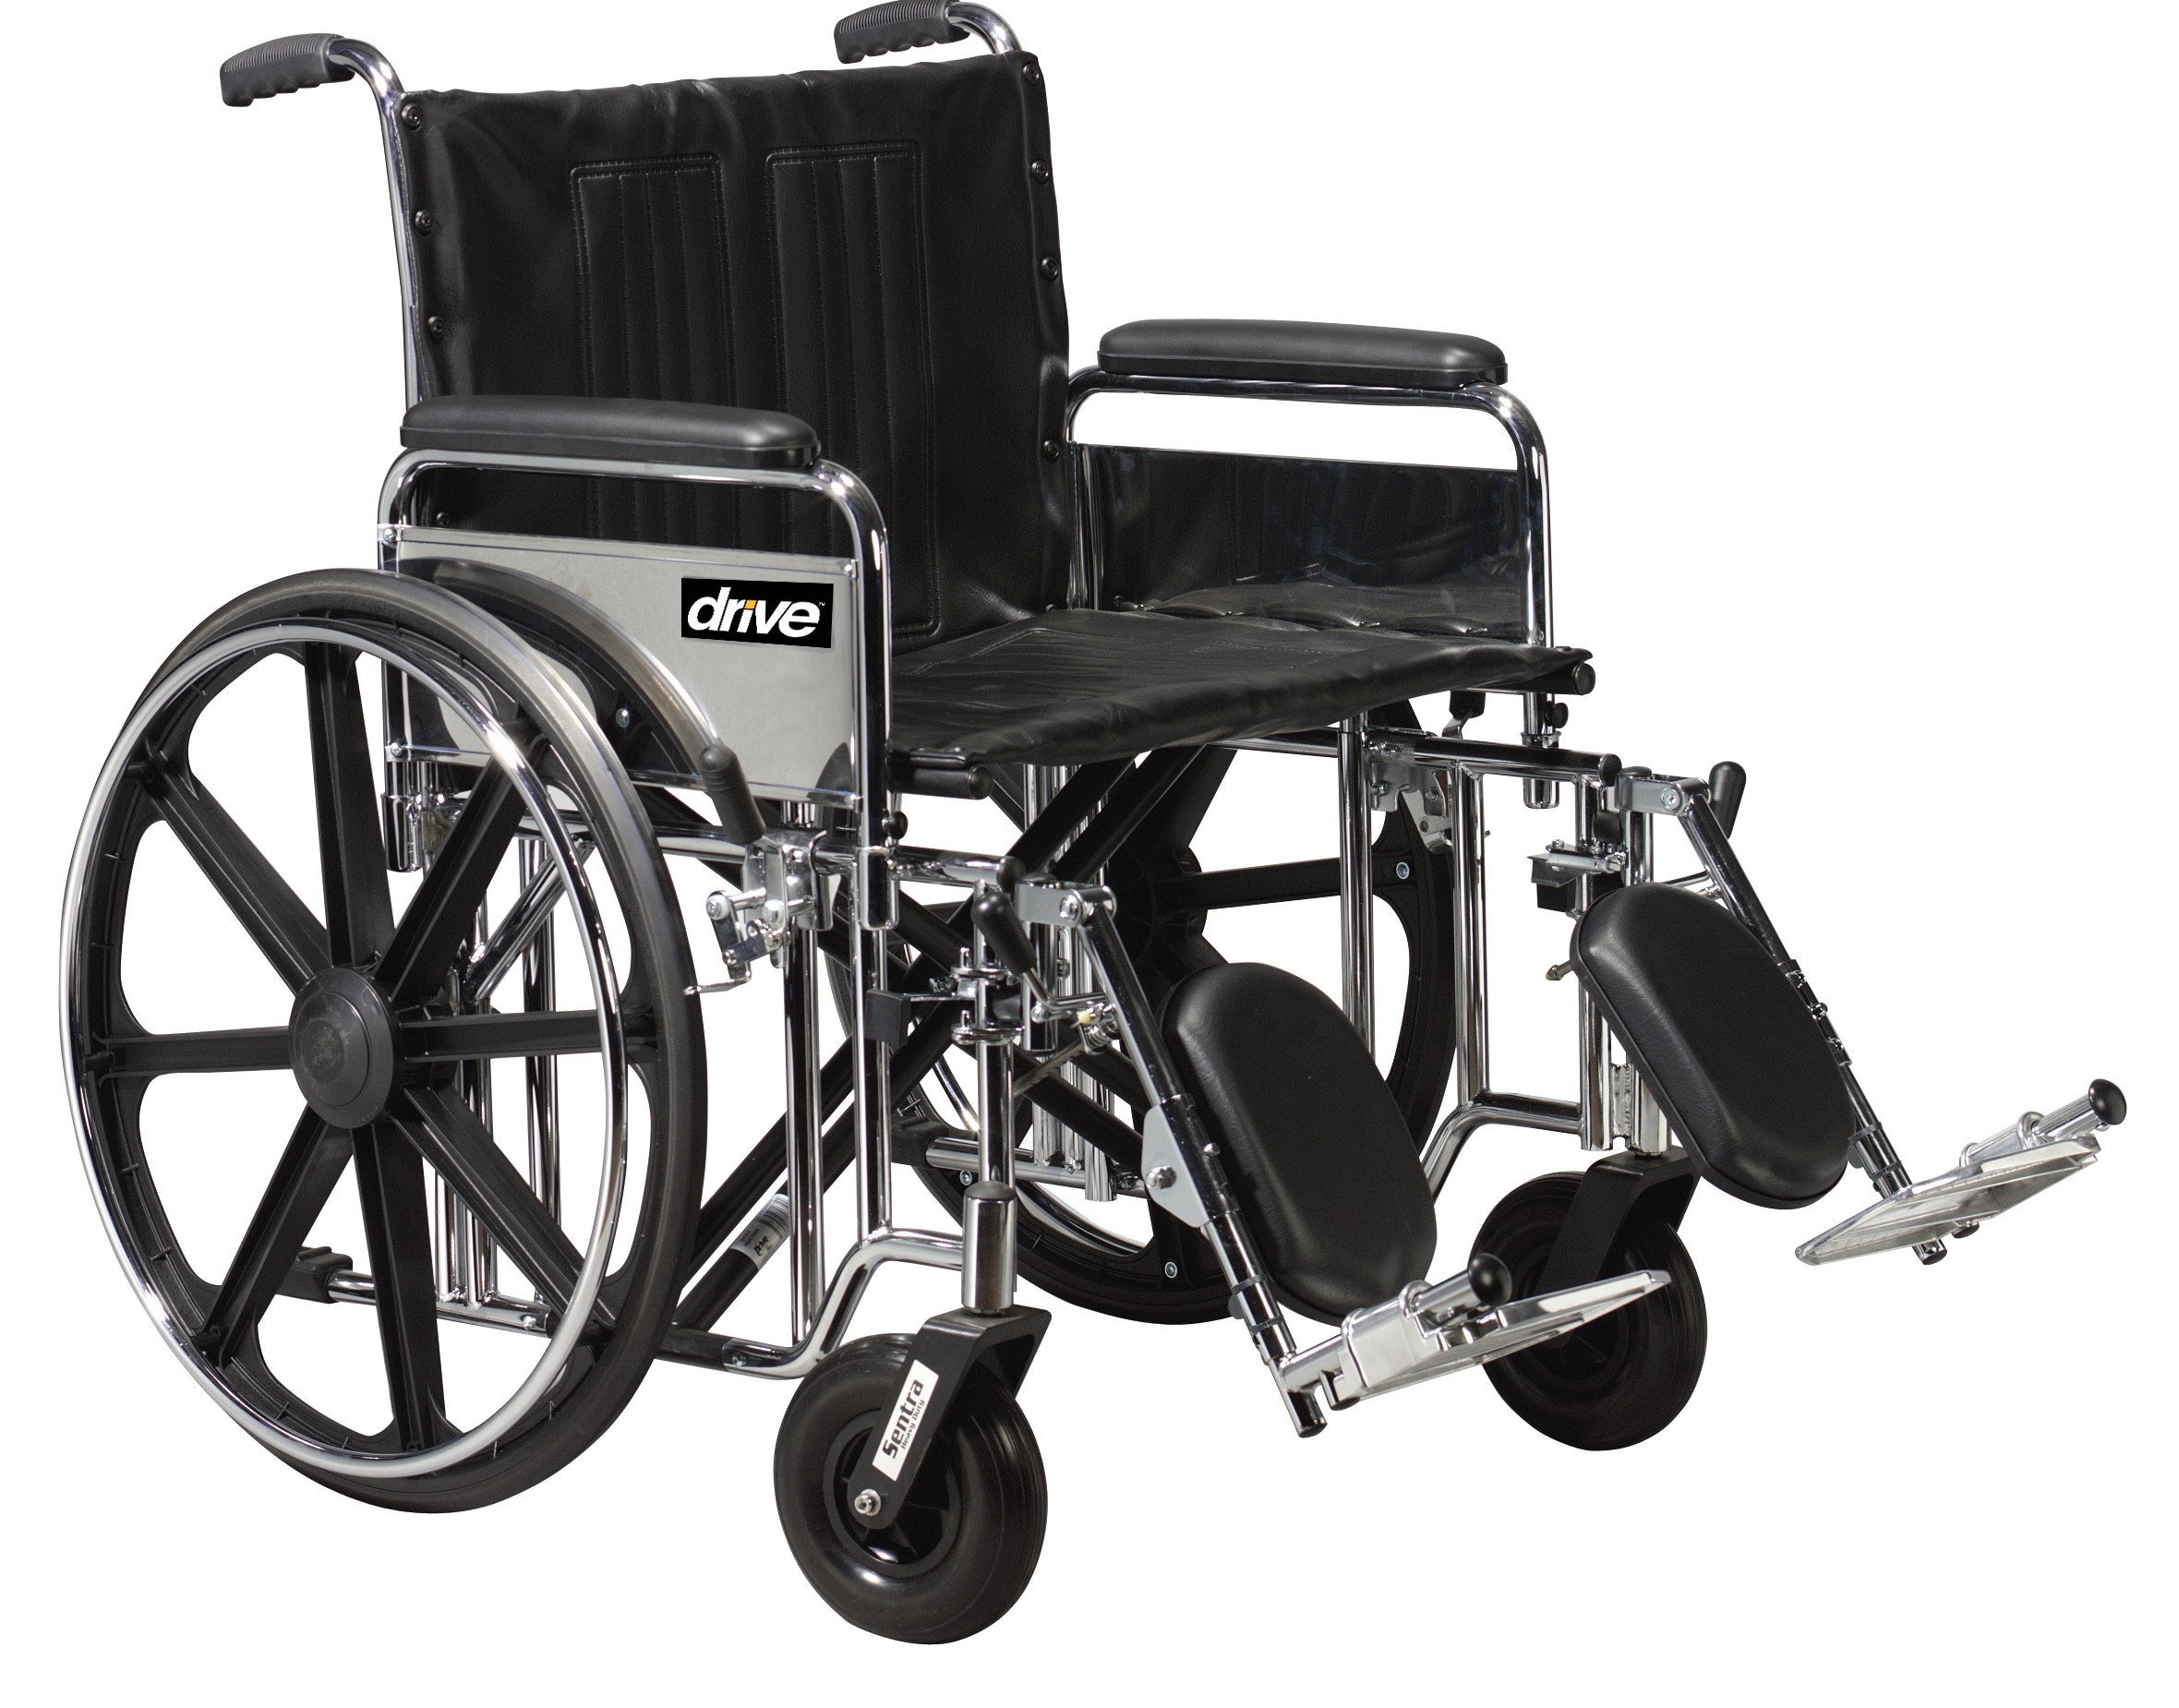 Bariatric Wheelchairs Products, Supplies and Equipment